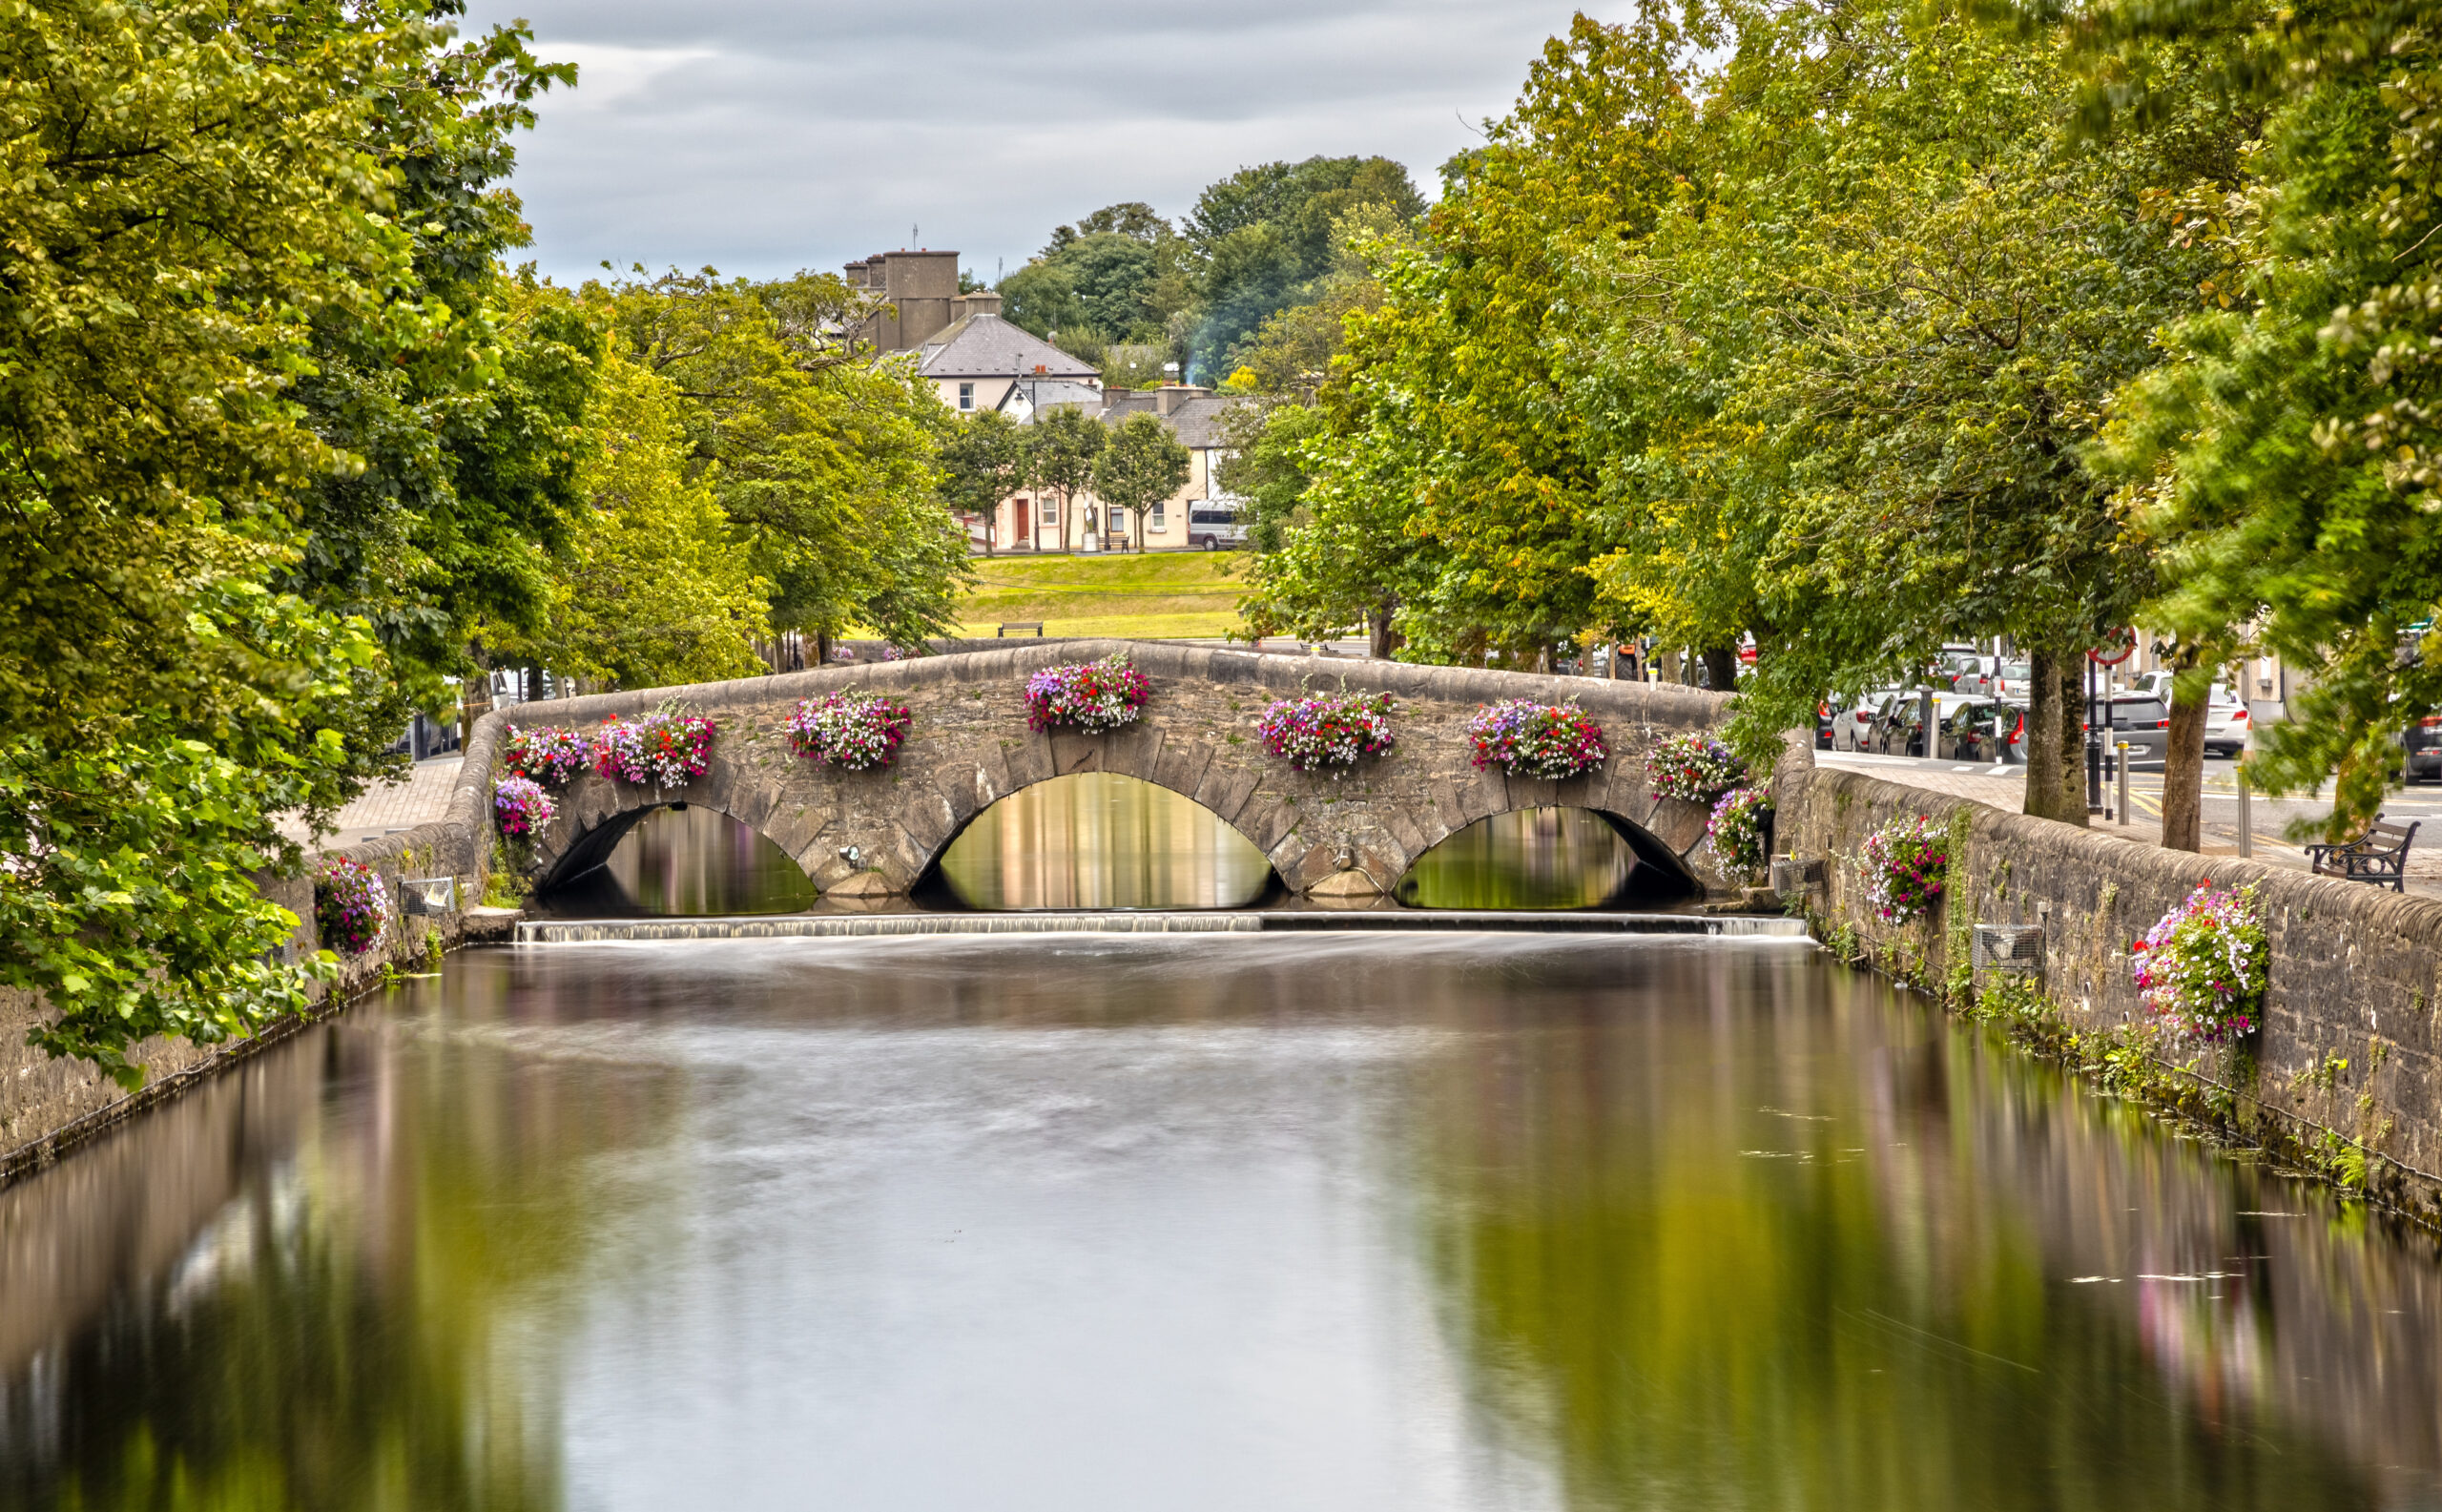 View of an adorable stone bridge decorated with flowers on a tree lined stream in Westport Ireland